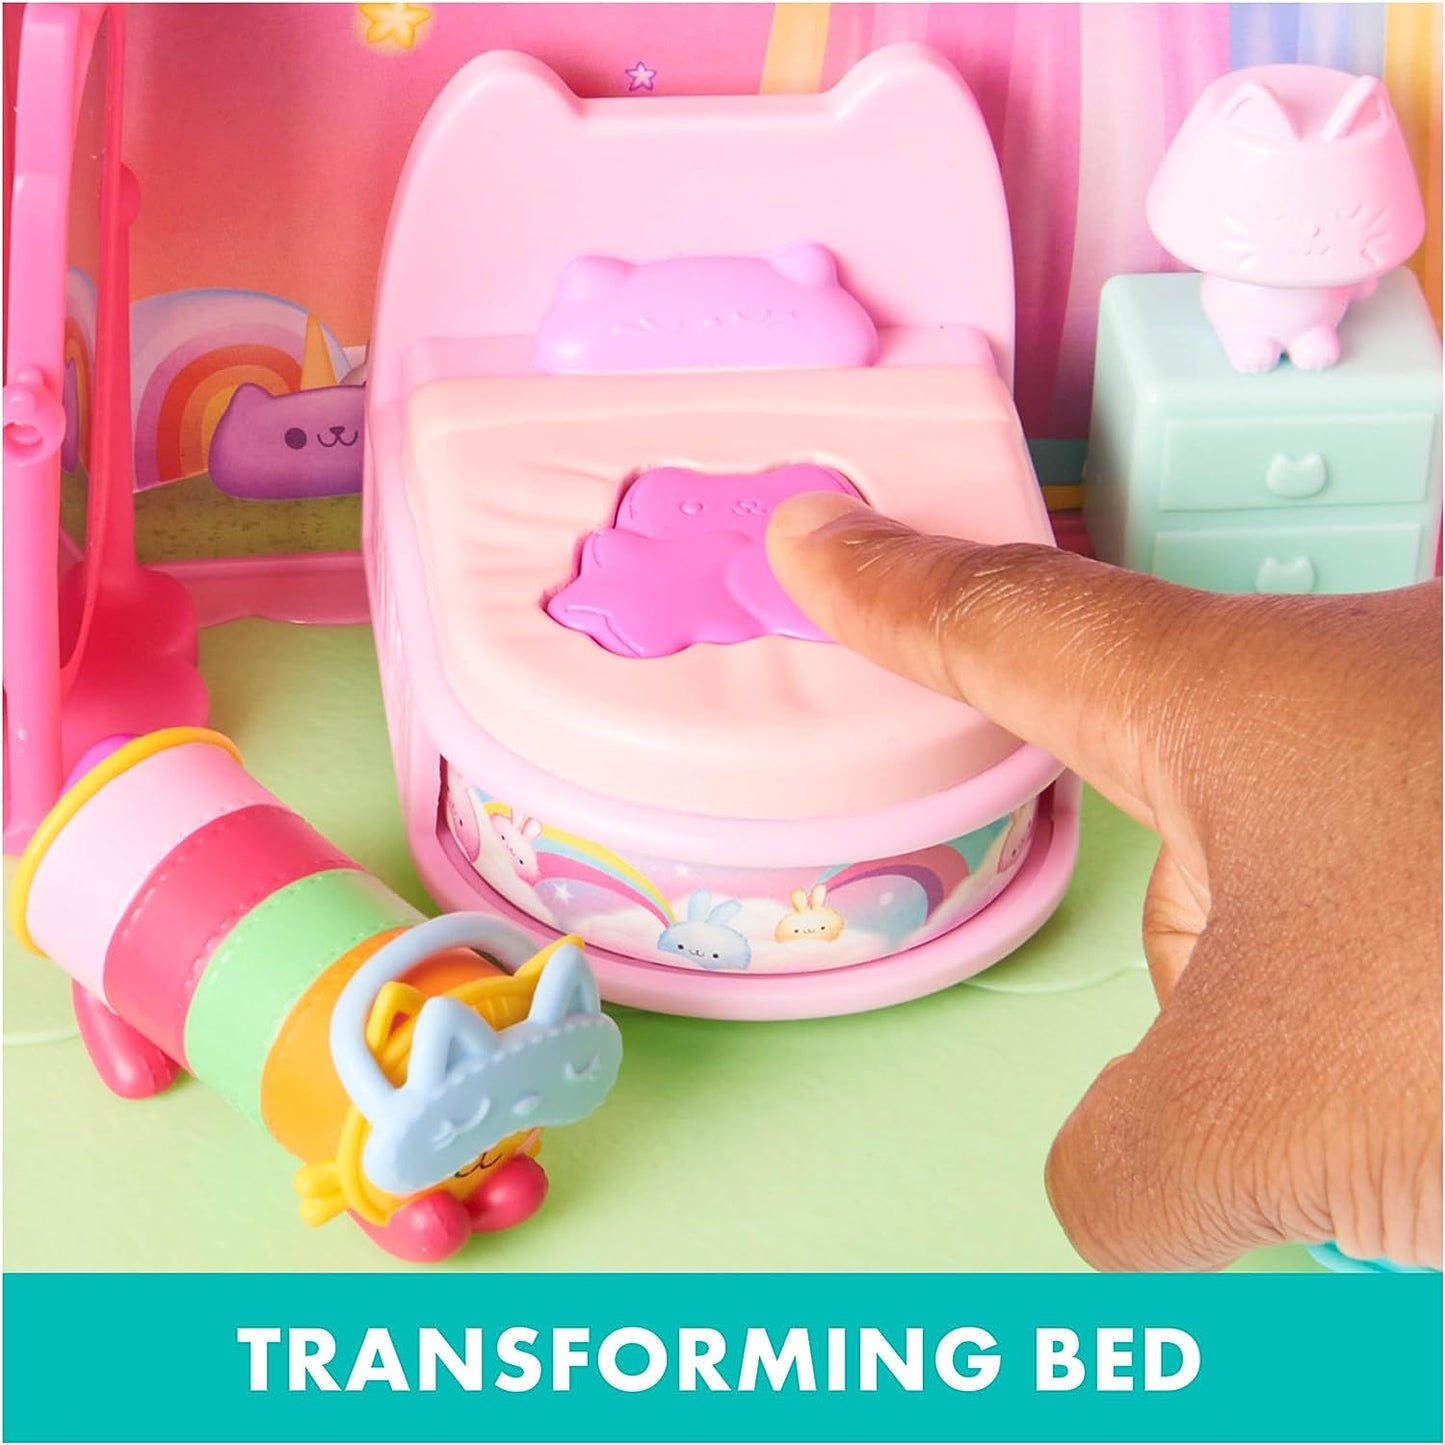 Spin Master - Gabby's Dollhouse, Pillow Cat's Sweet Dreams Bedroom Playset